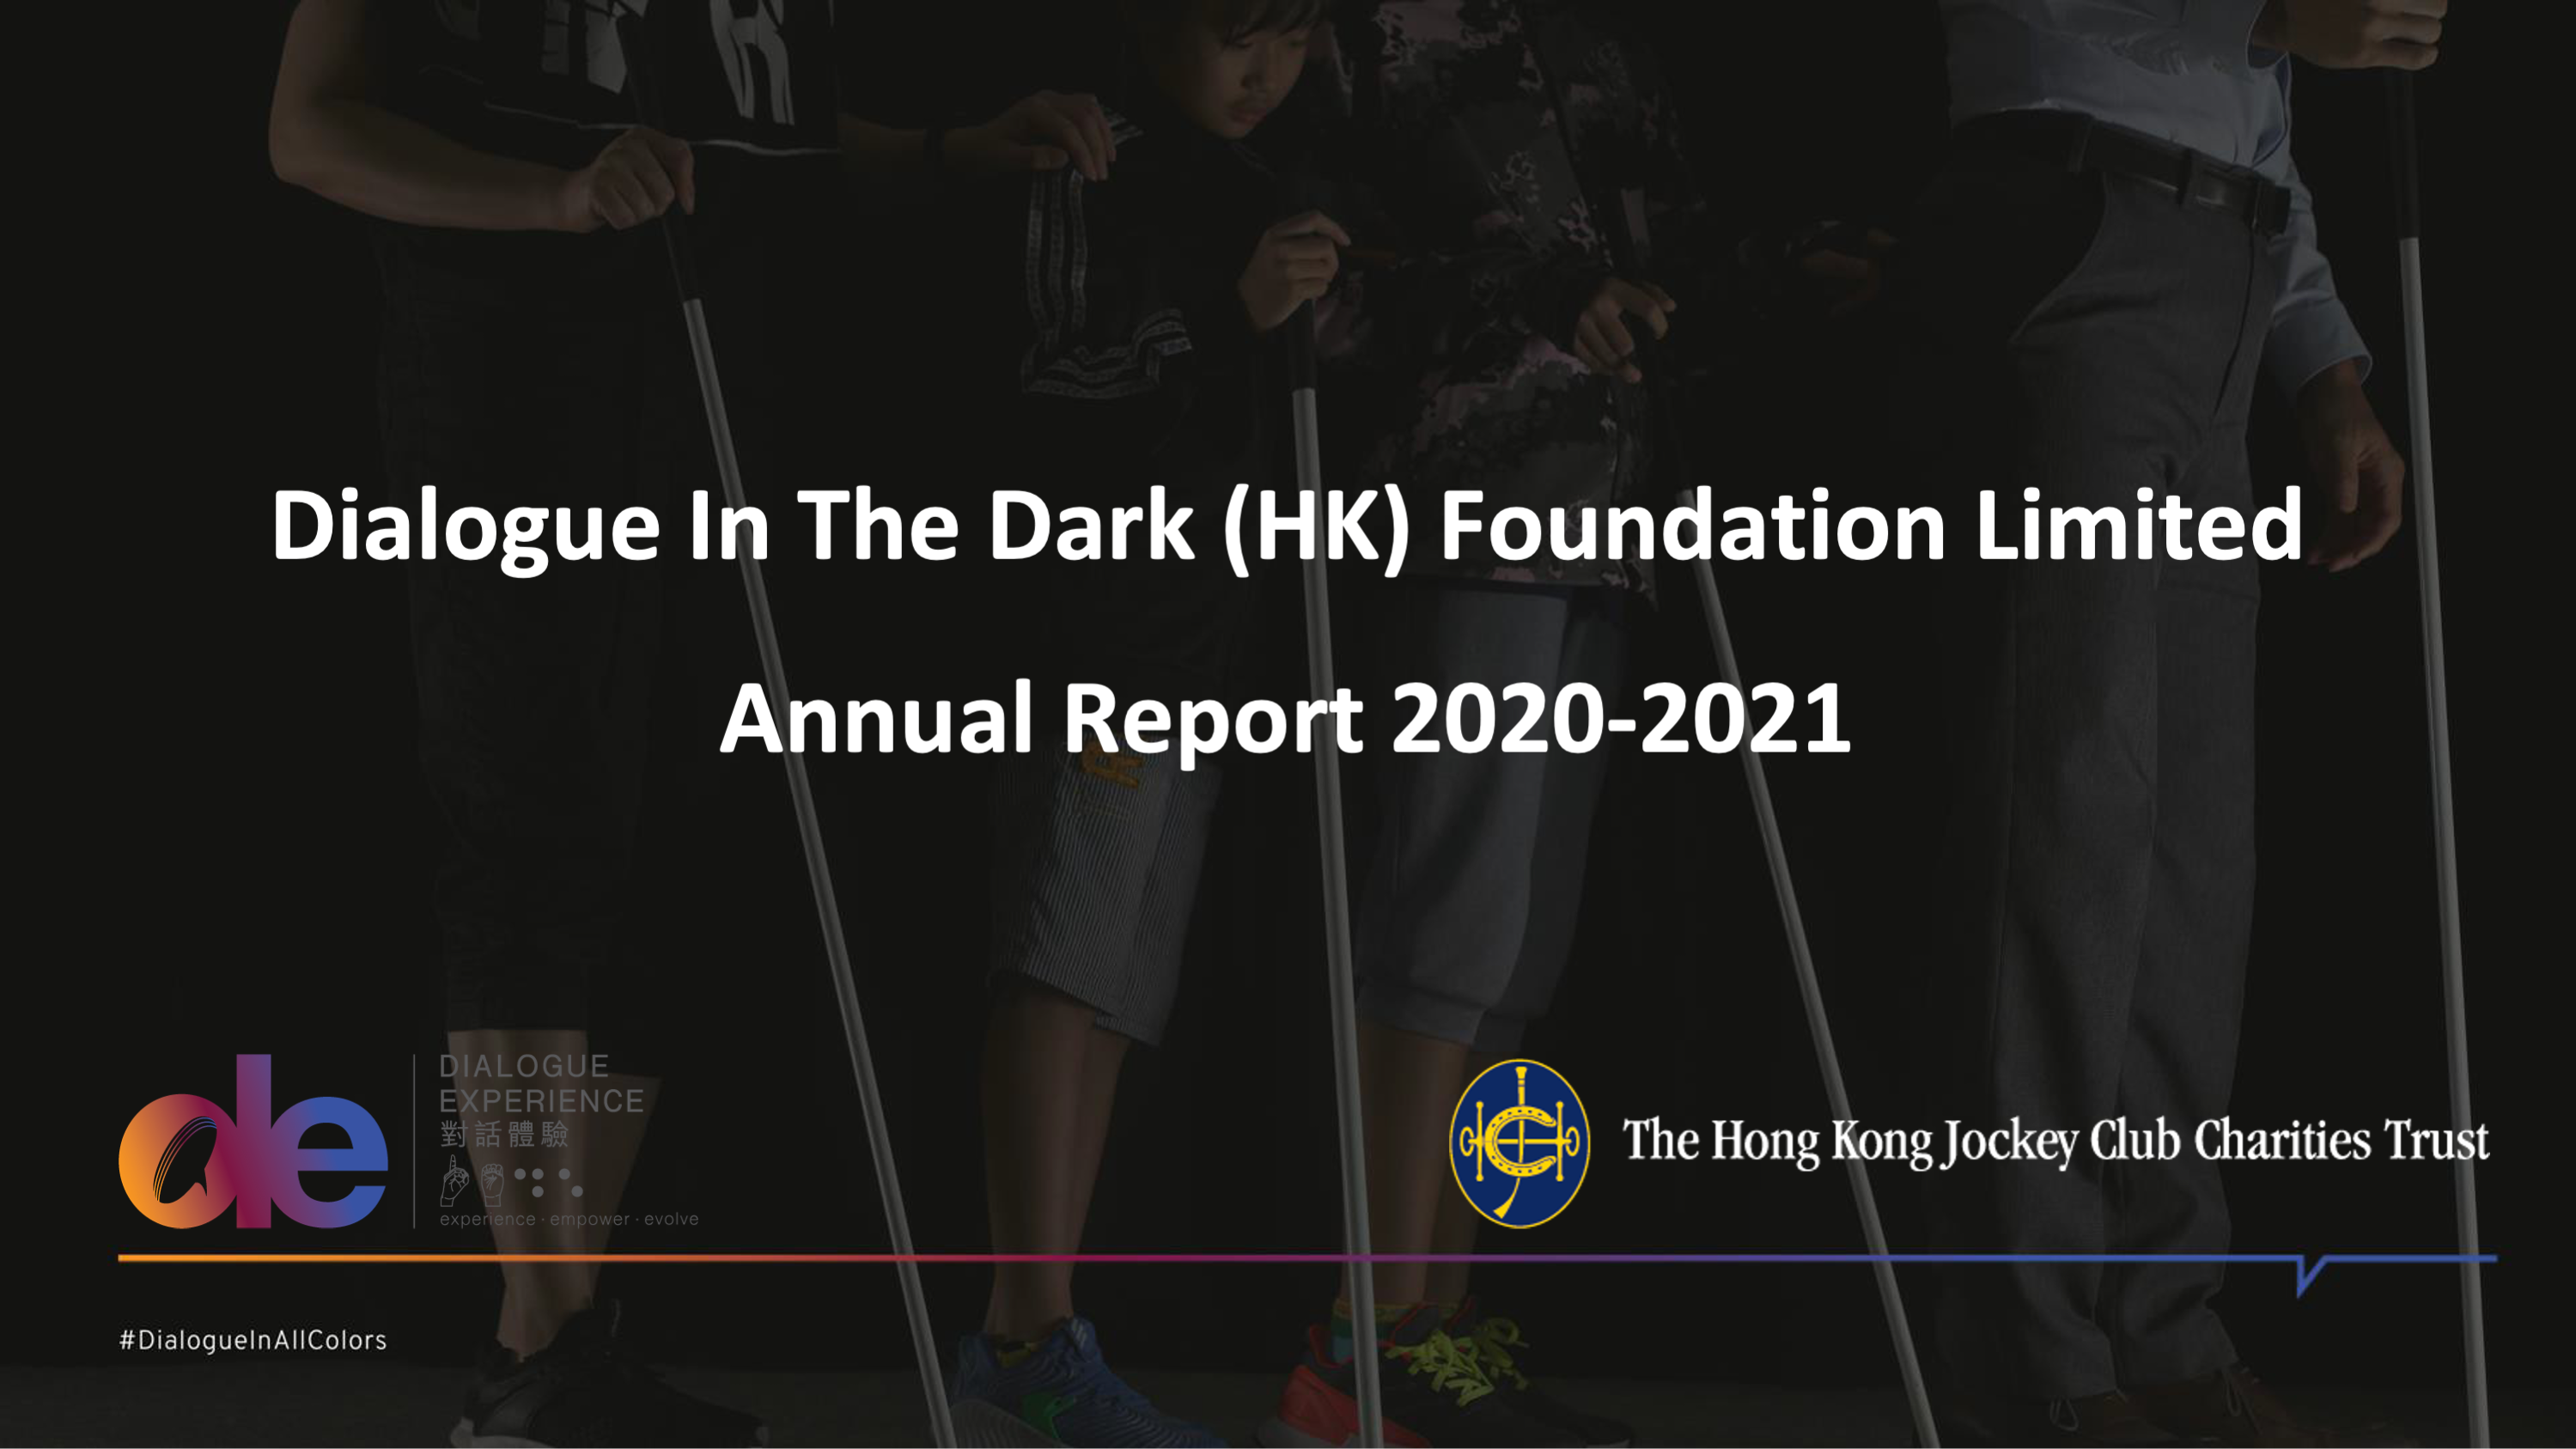 Dialogue In The Dark (HK) Foundation Limited  Annual Report 2020-2021